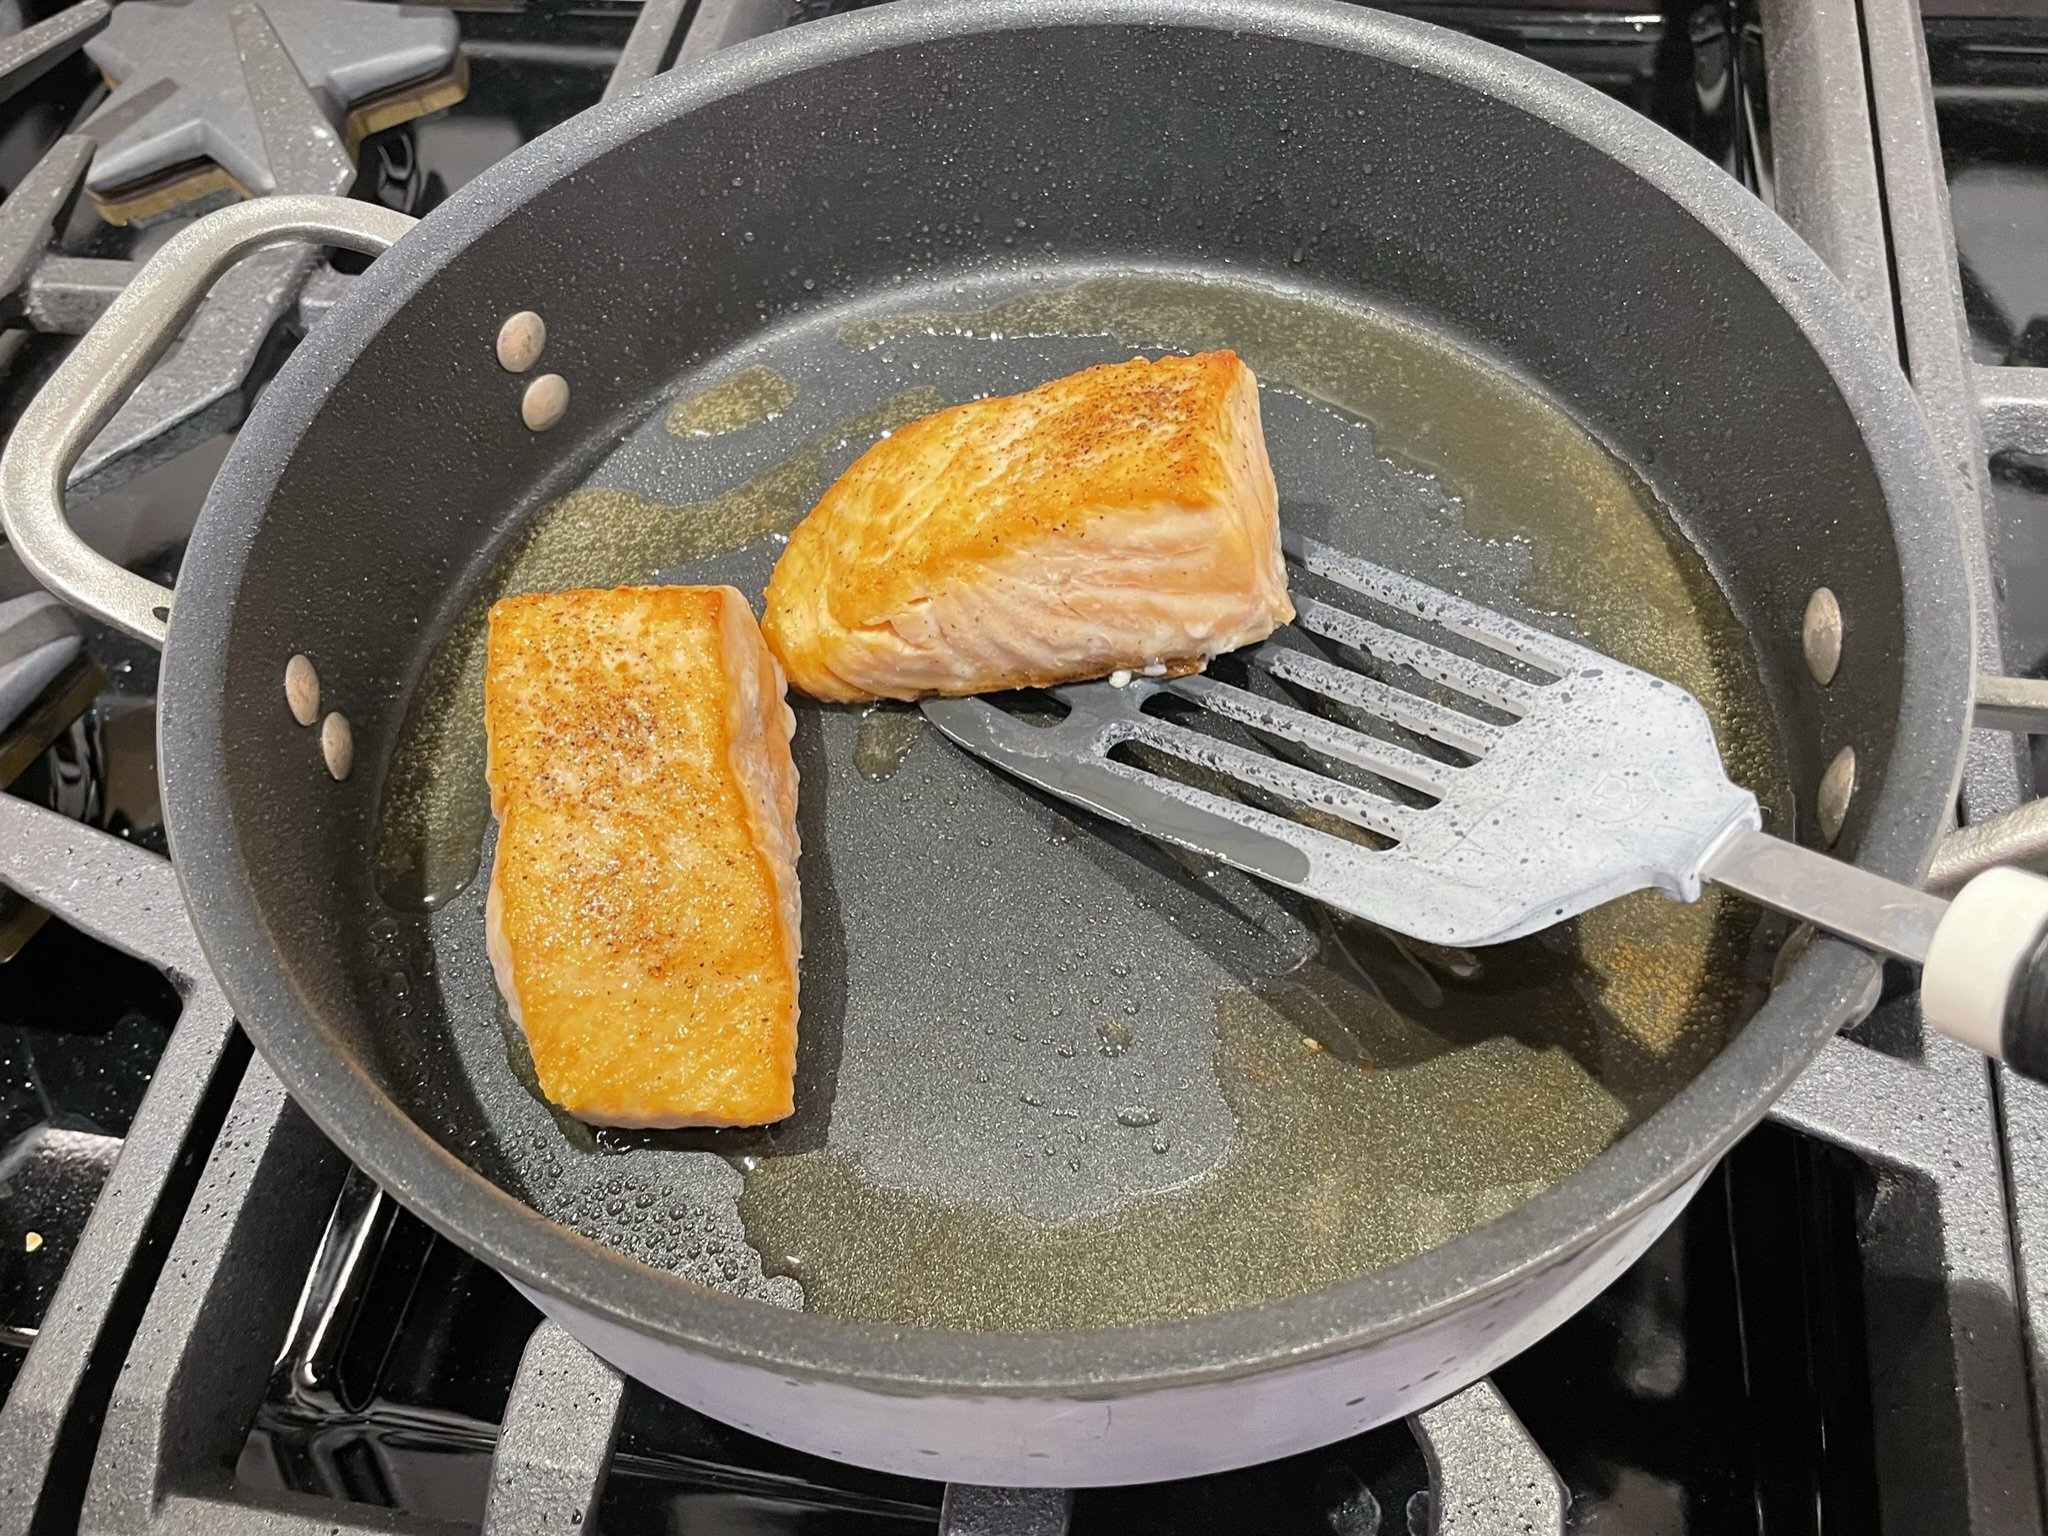 Remove pan from heat.